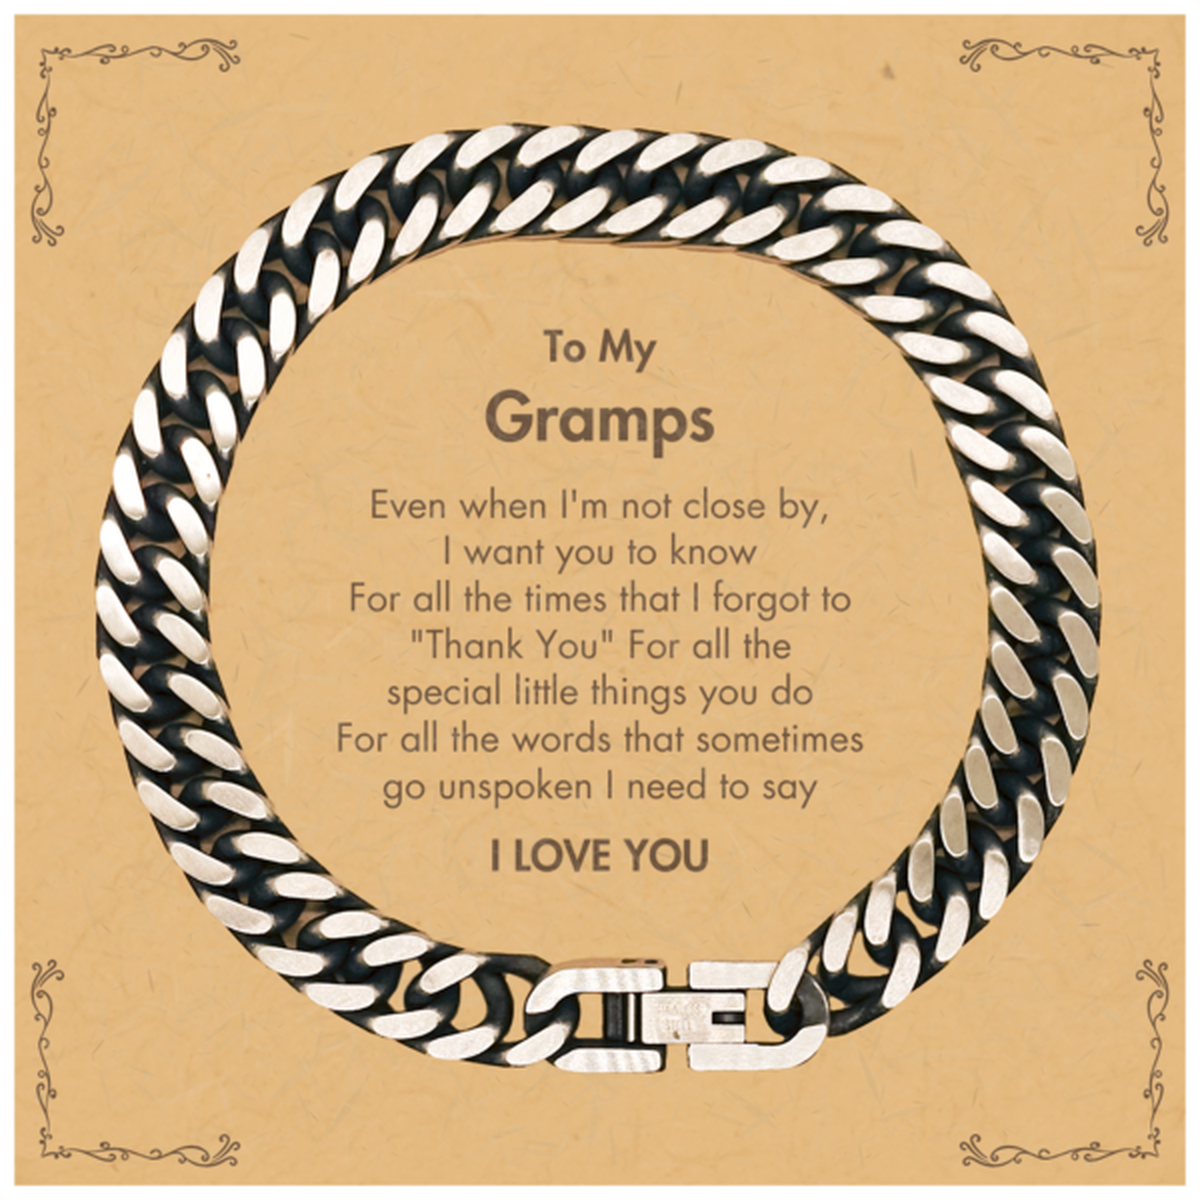 Thank You Gifts for Gramps, Keepsake Cuban Link Chain Bracelet Gifts for Gramps Birthday Mother's day Father's Day Gramps For all the words That sometimes go unspoken I need to say I LOVE YOU